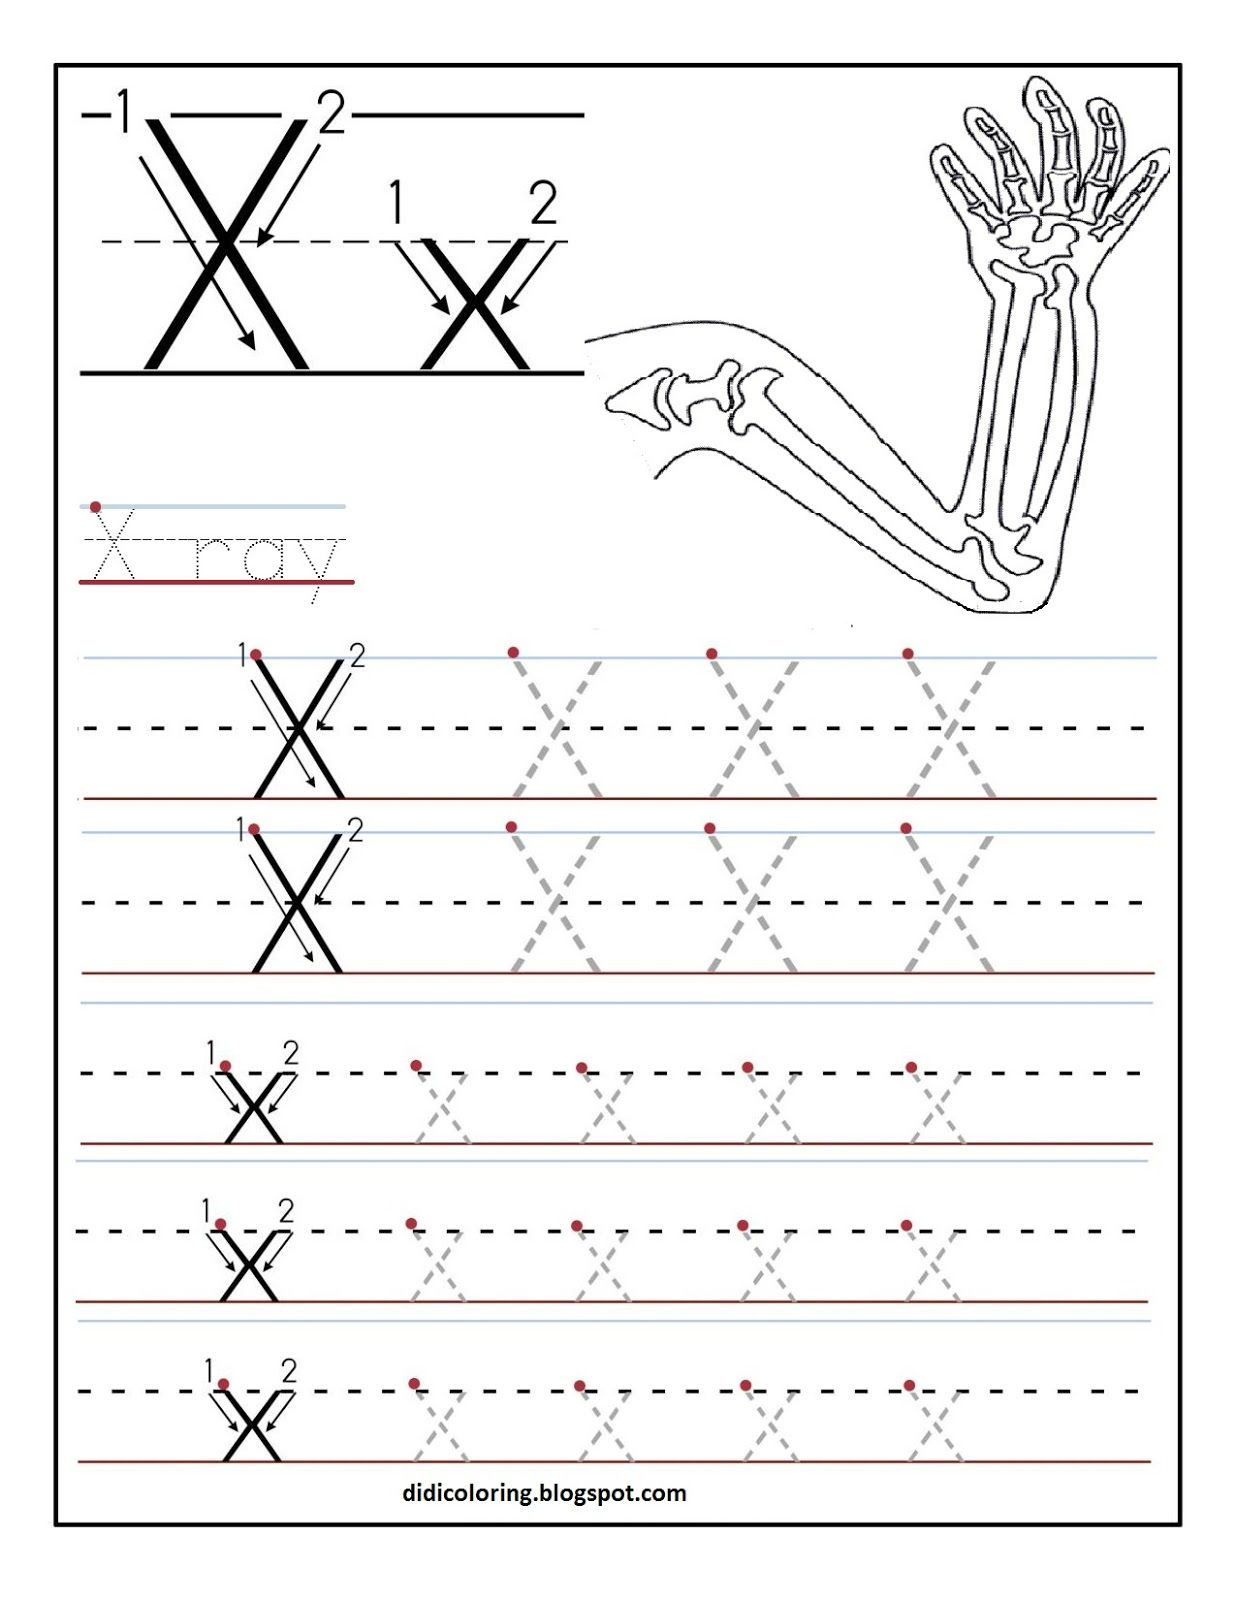 Printable+Letter+X+Tracing+Worksheets+For+Kids (1236